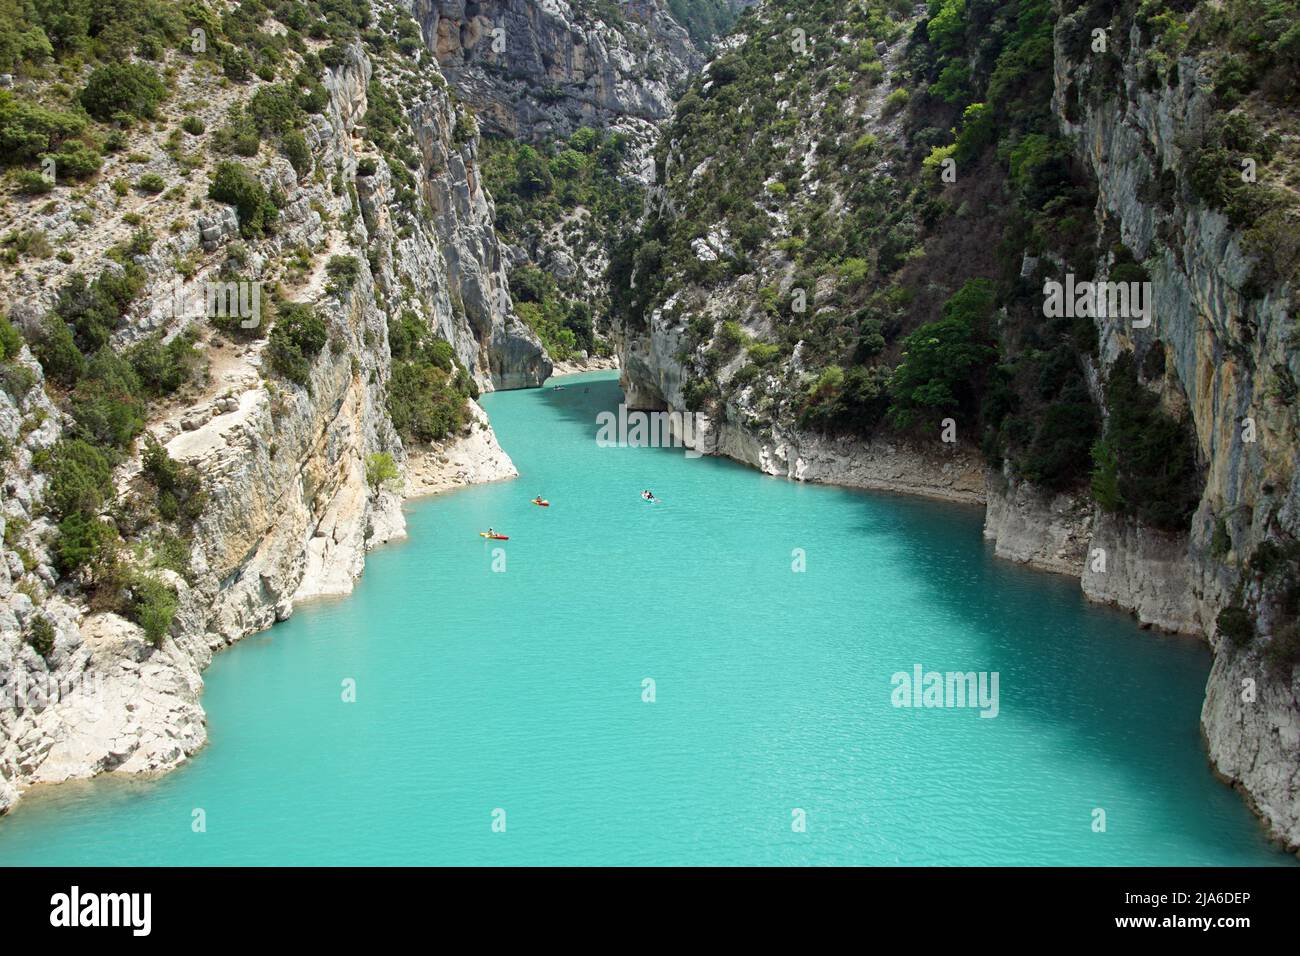 The Verdon Gorge (French: Les Gorges du Verdon), a river canyon located in the Provence-Alpes-Côte d'Azur region of Southeastern France. Stock Photo